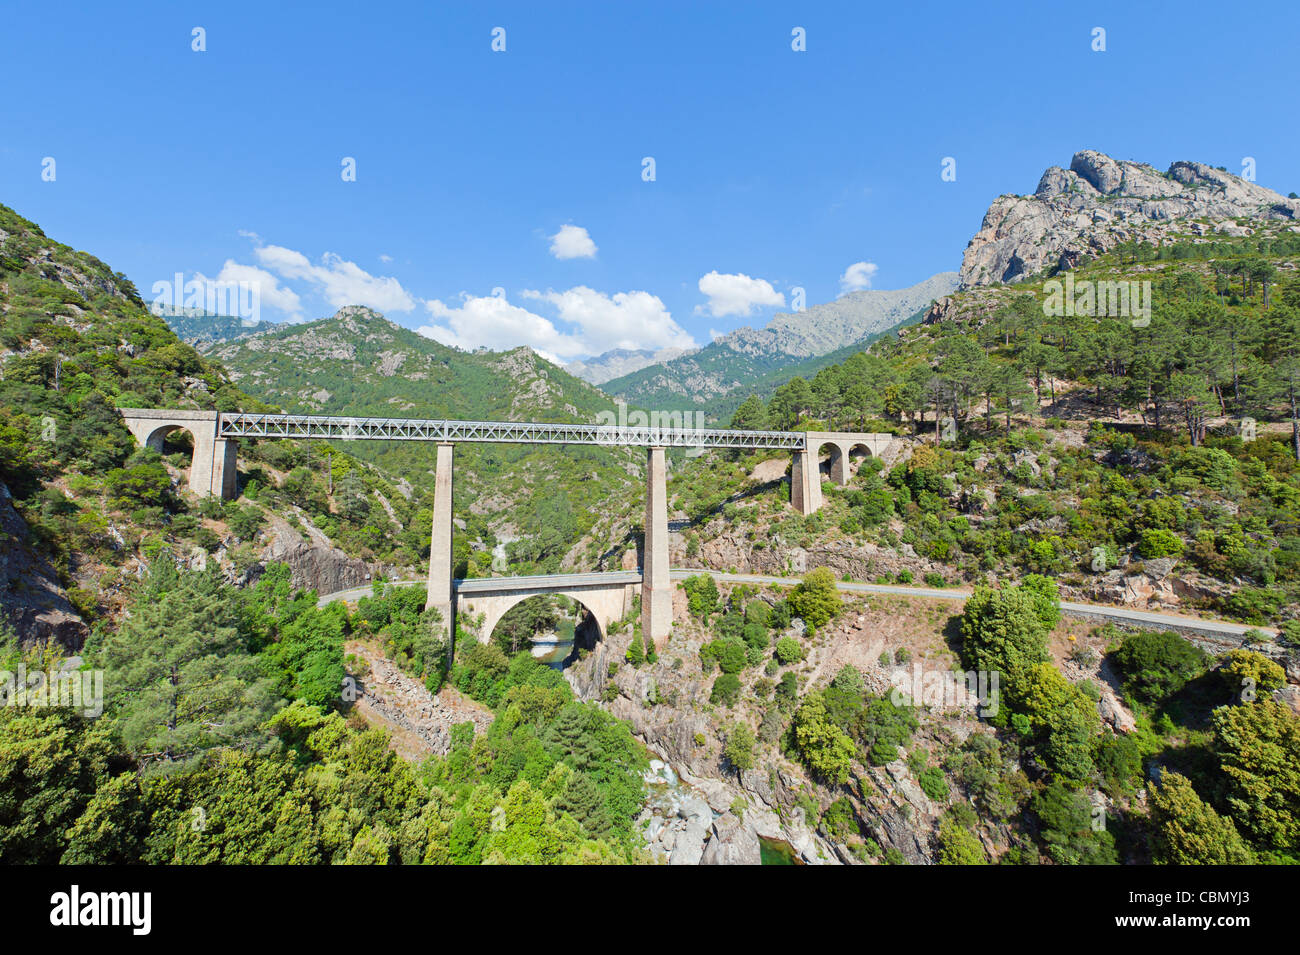 Large railway bridge and viaduct in Corsica, France Stock Photo